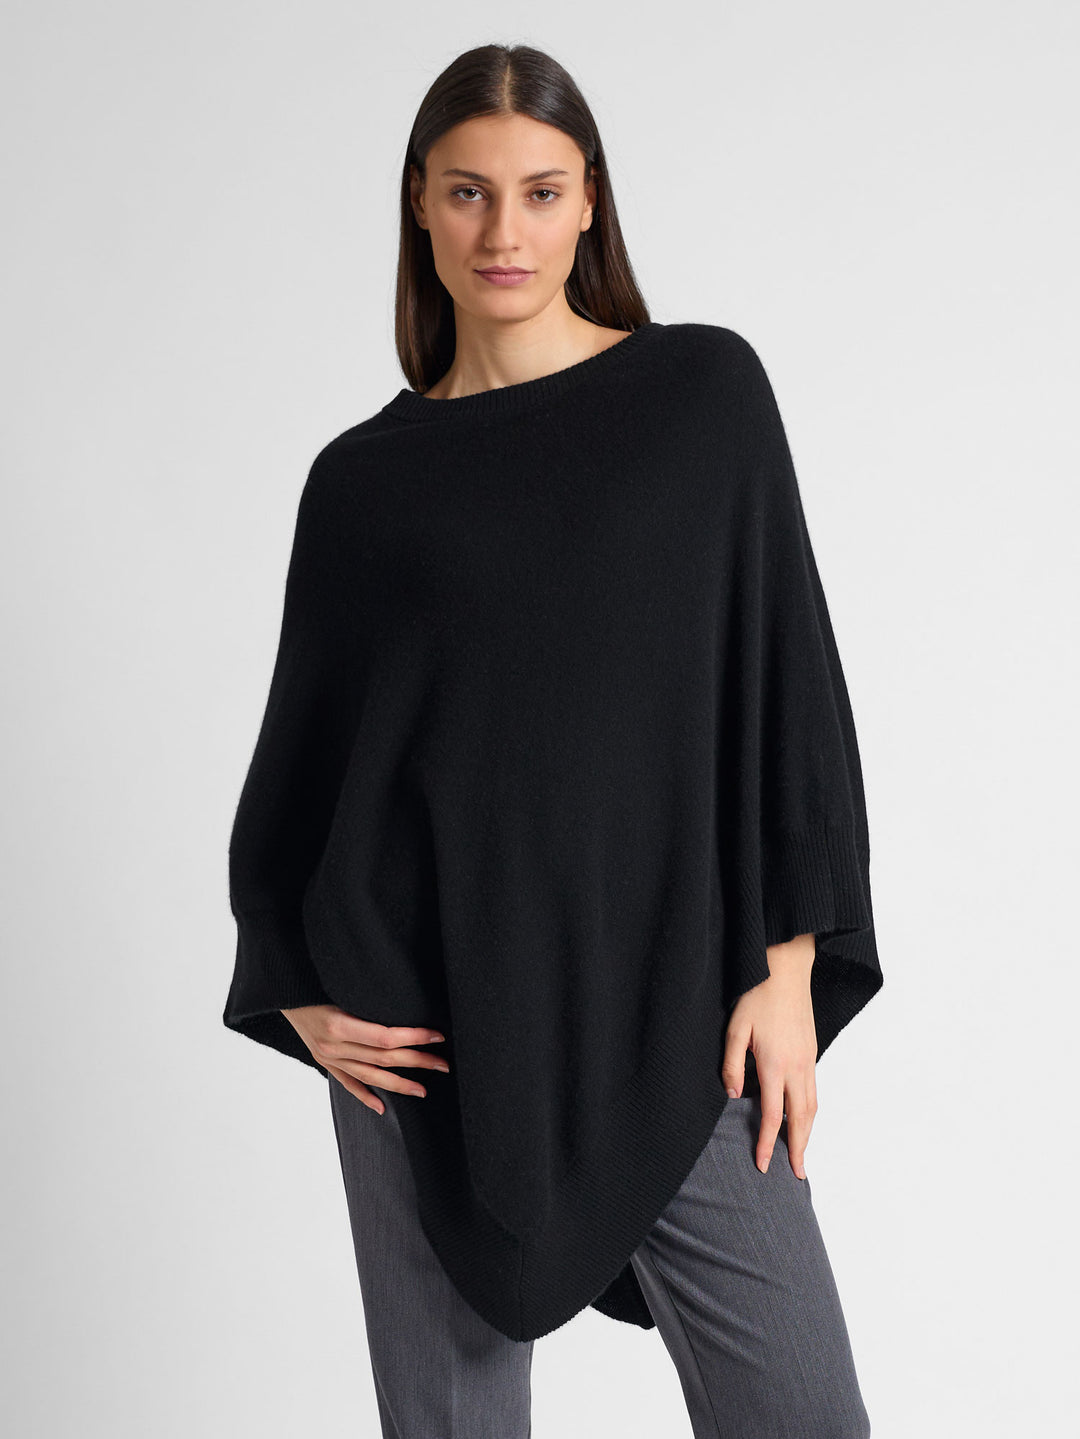 Cashmere poncho "Haddy" in 100% pure cashmere. Scandinavian design by Kashmina. Color: Black.